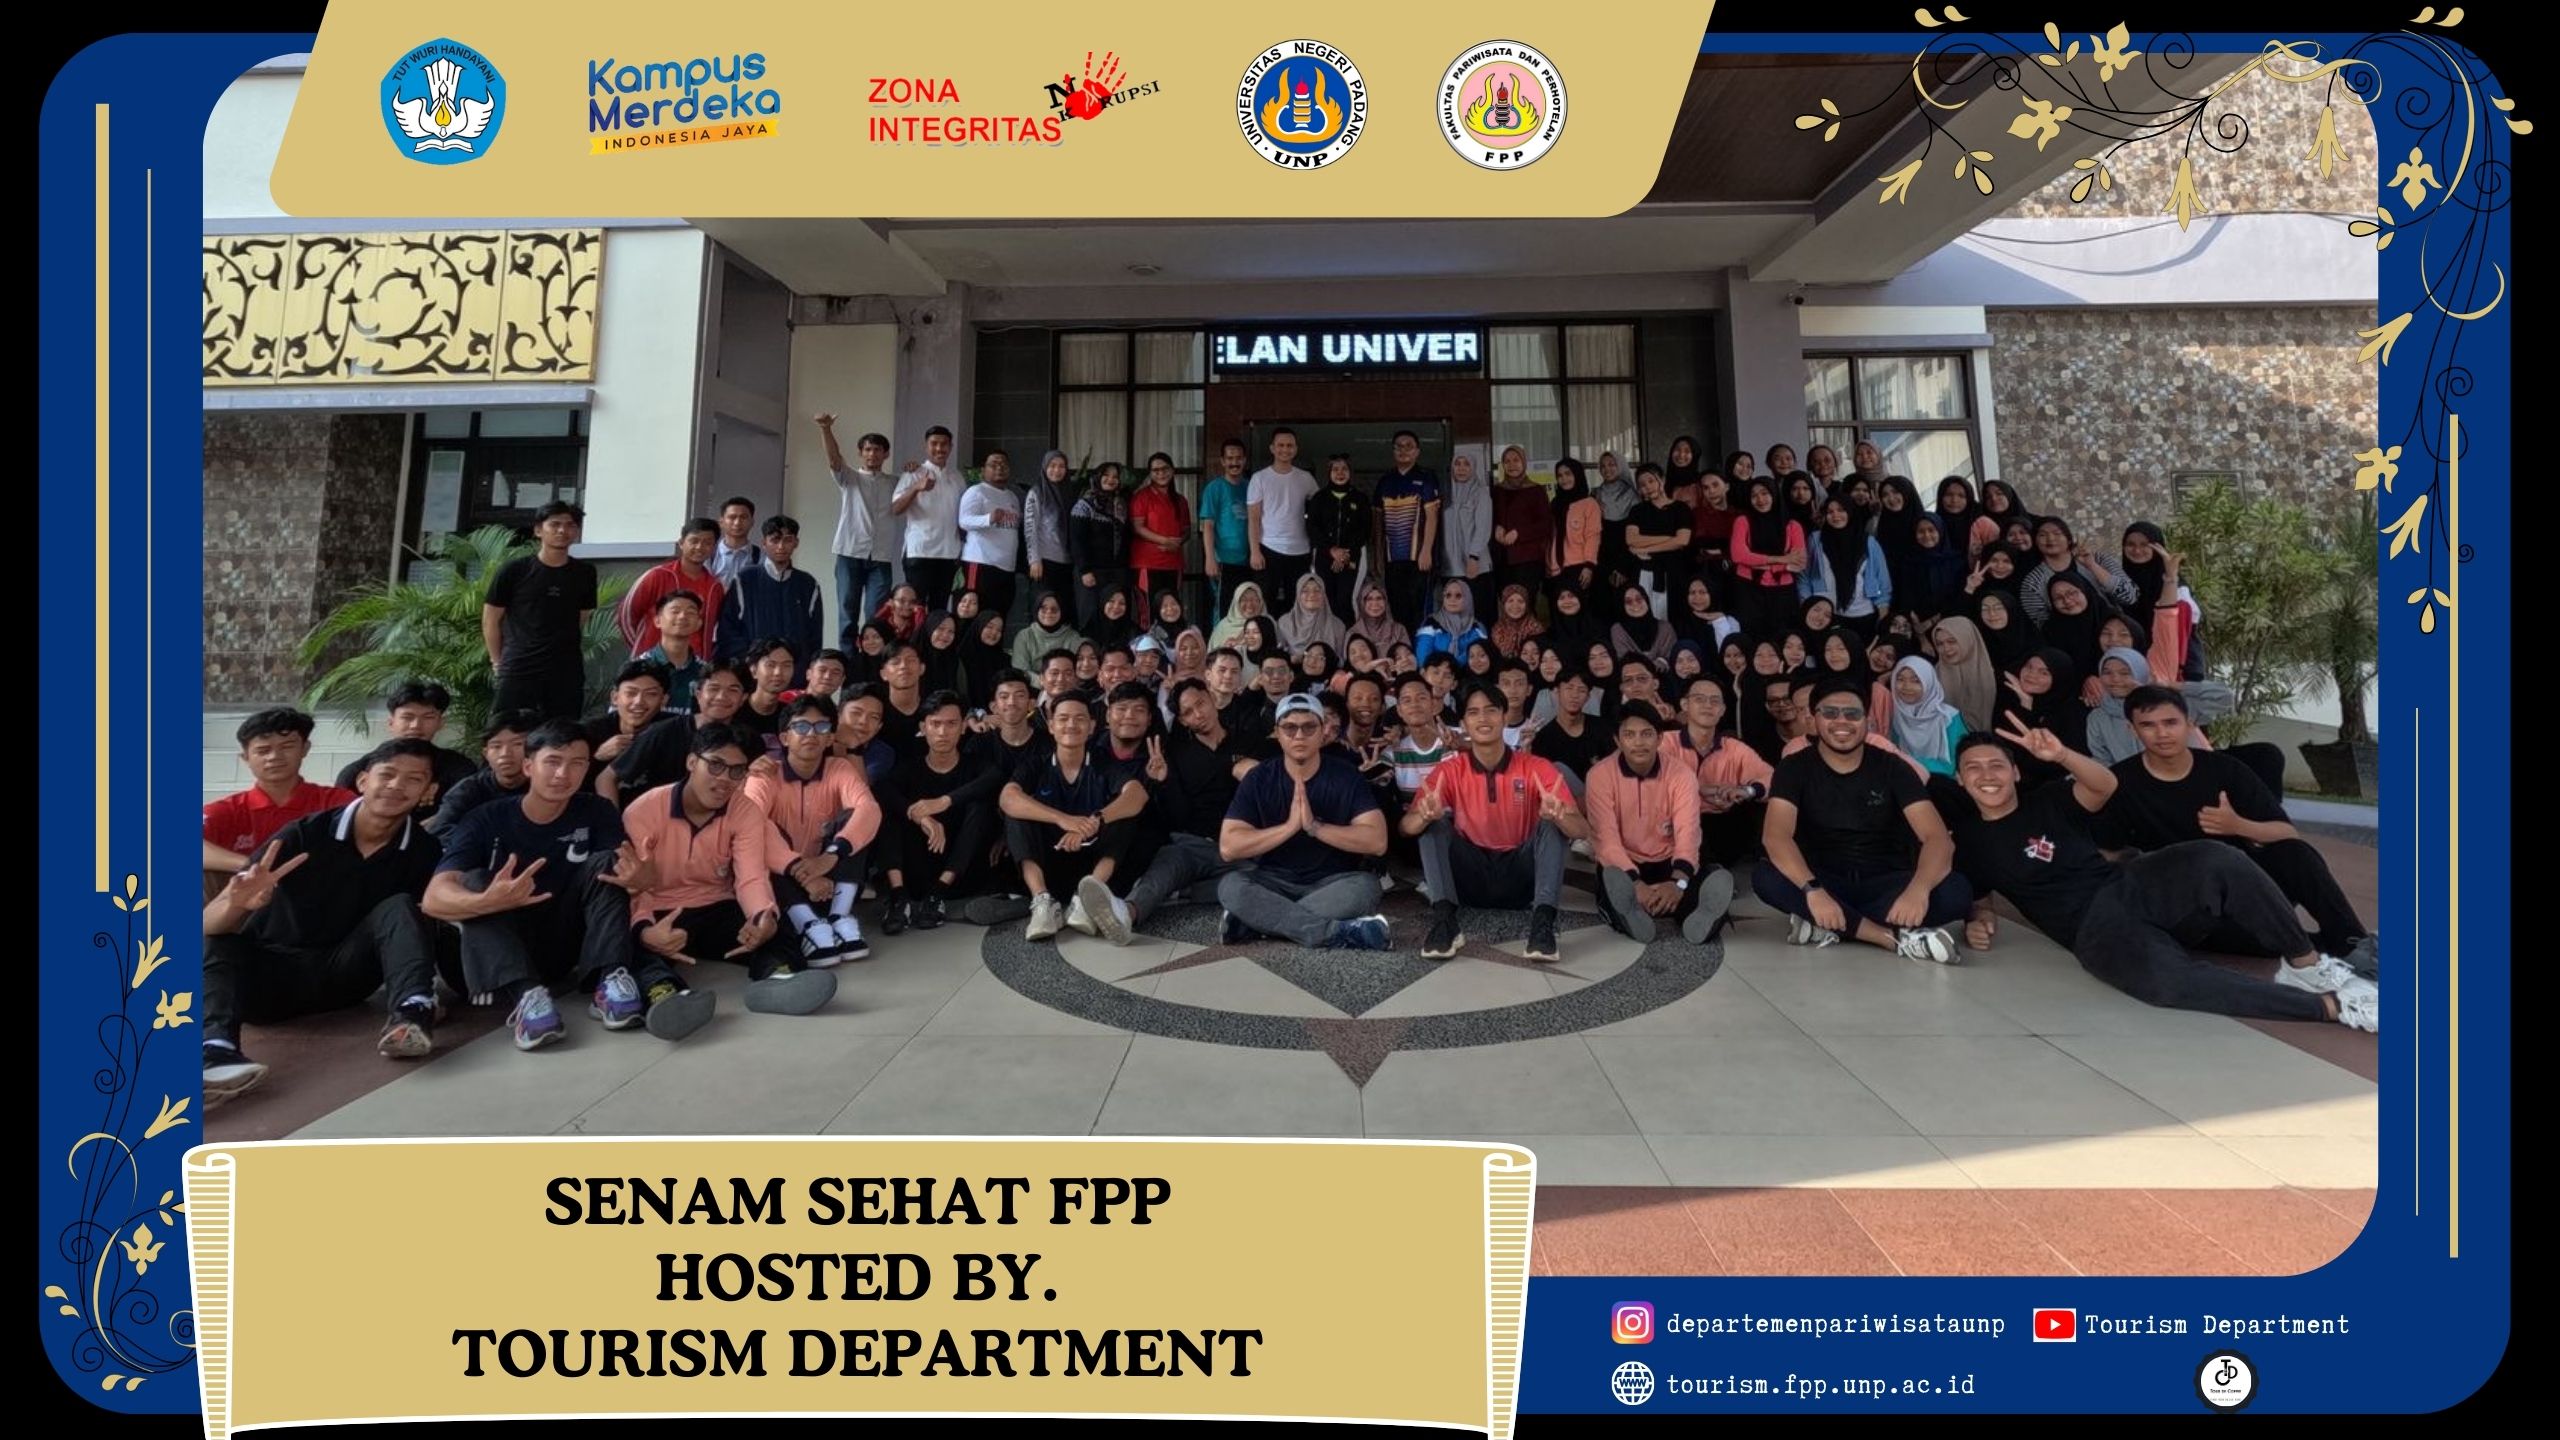 Senam Sehat FPP – Hosted by. Tourism Department